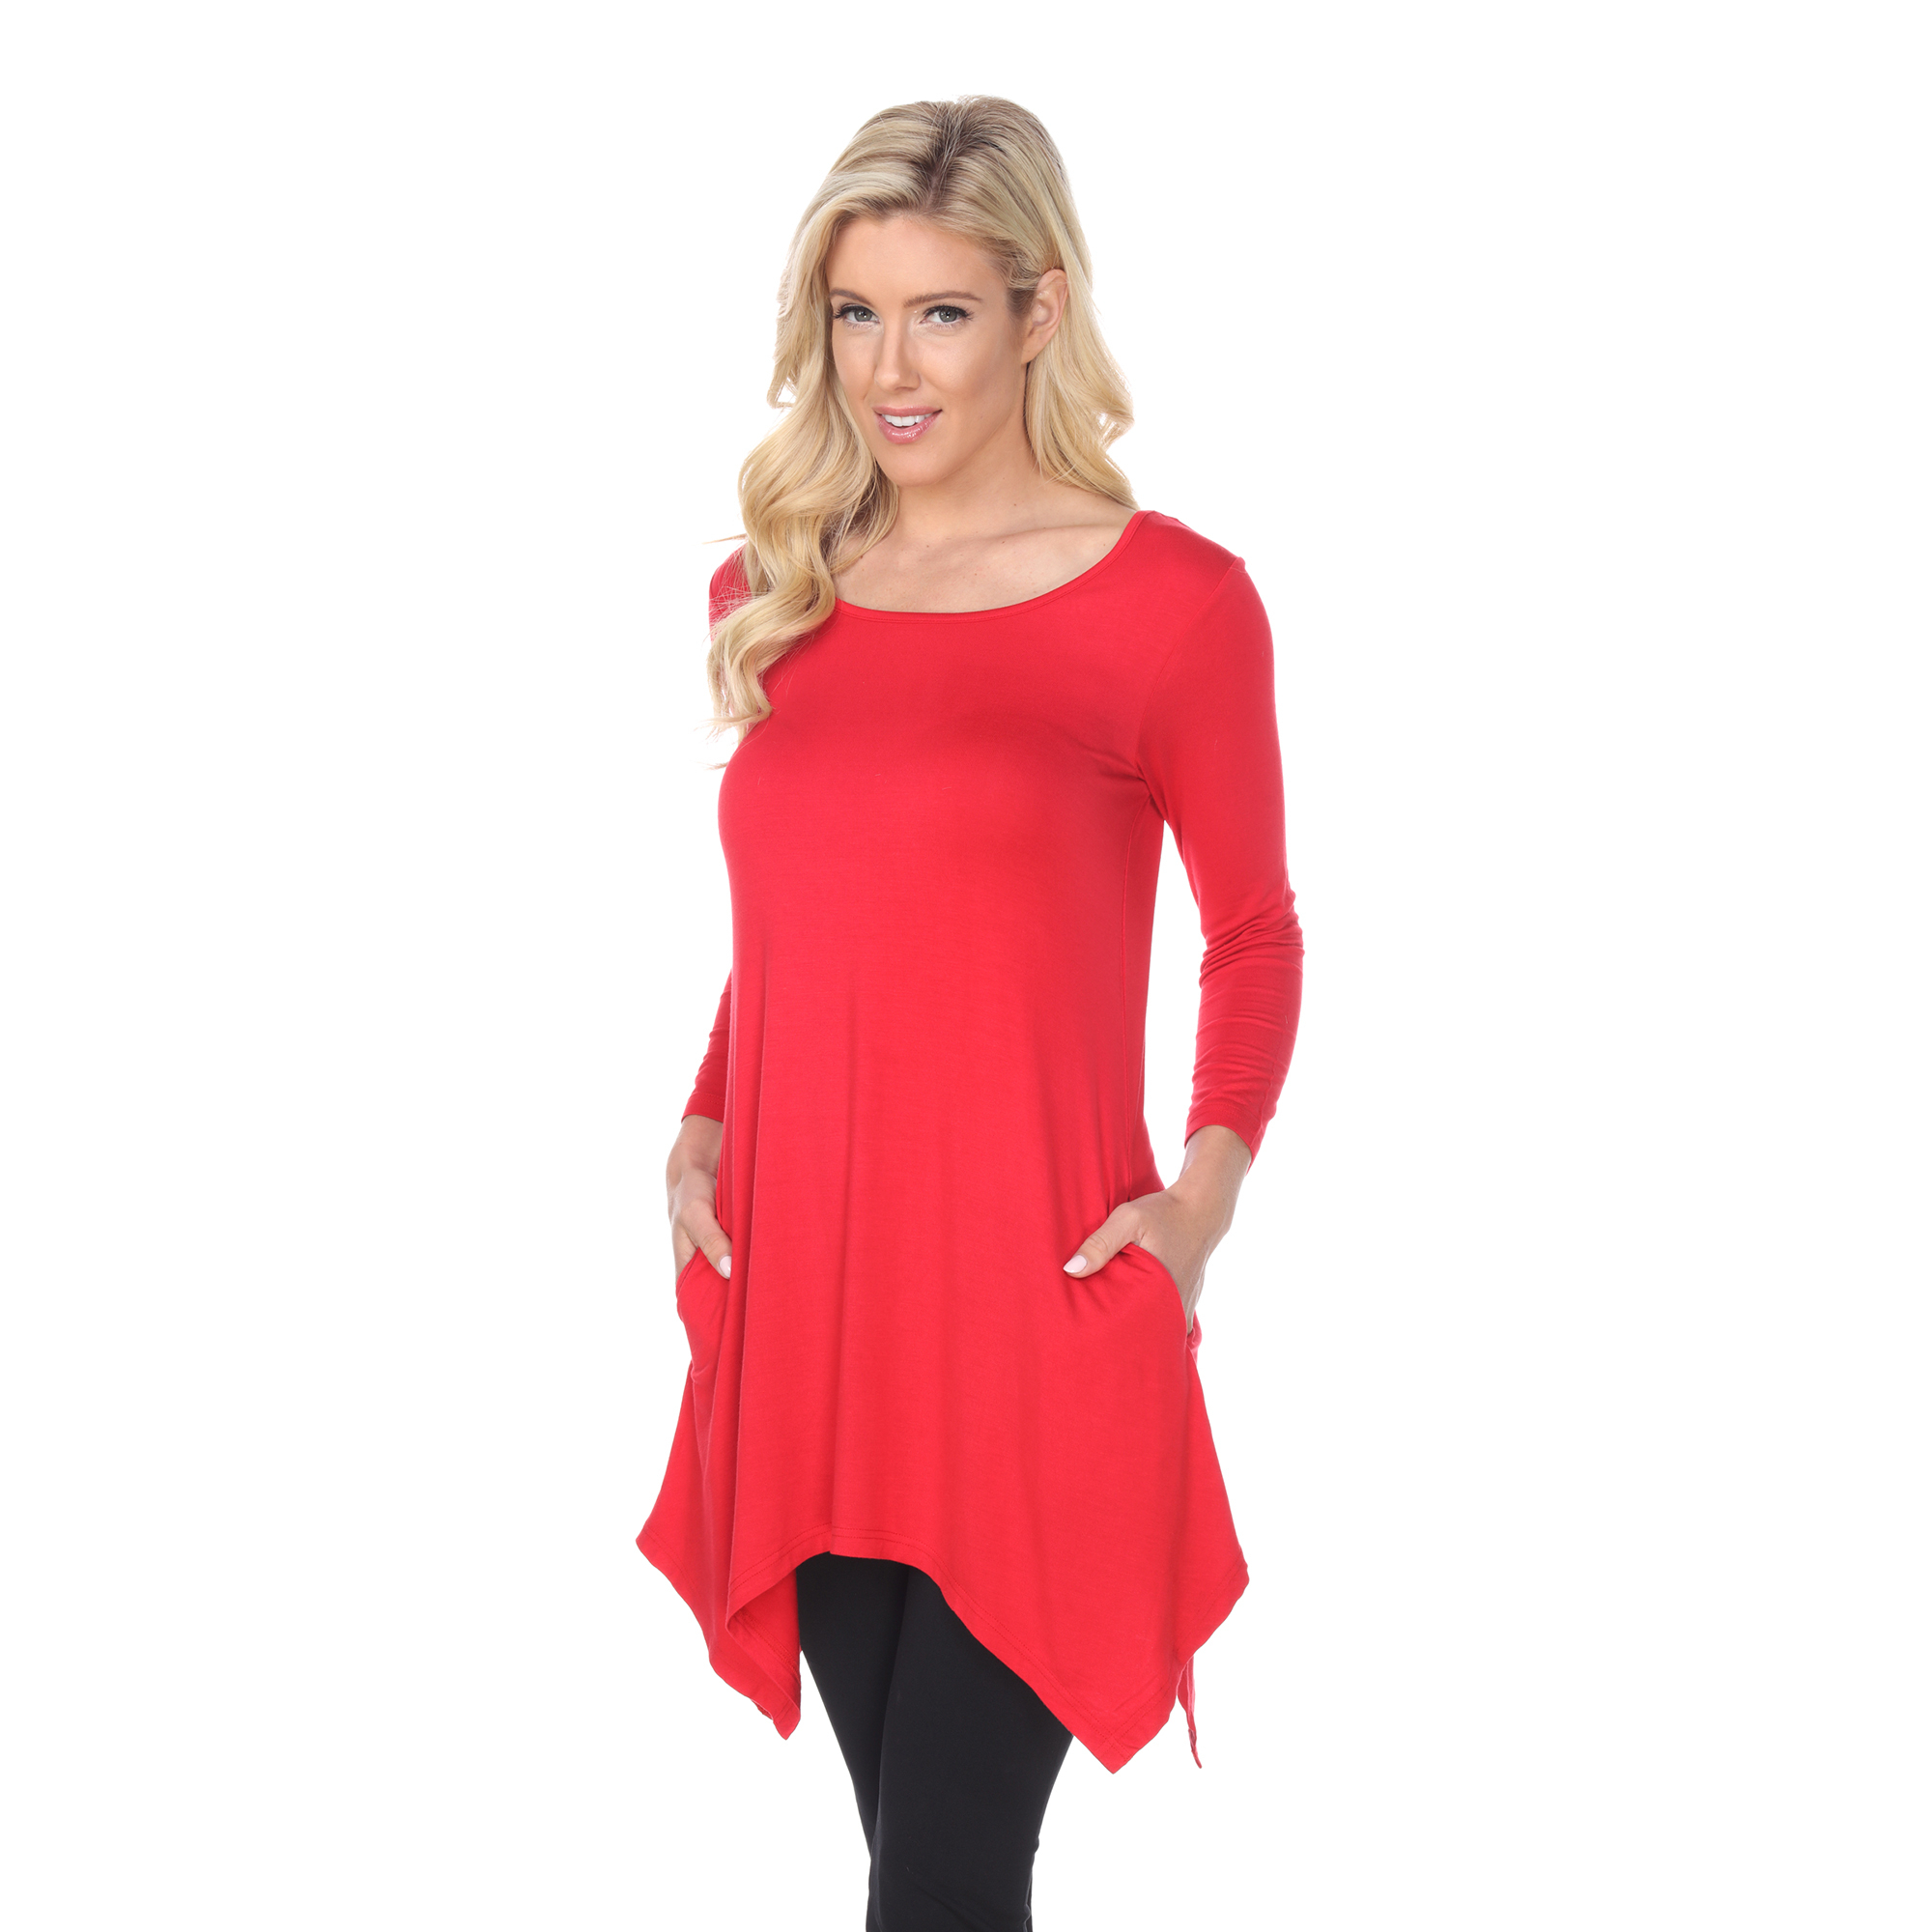 White Mark Women's Quarter Sleeve Tunic Top With Pockets - Red, Large